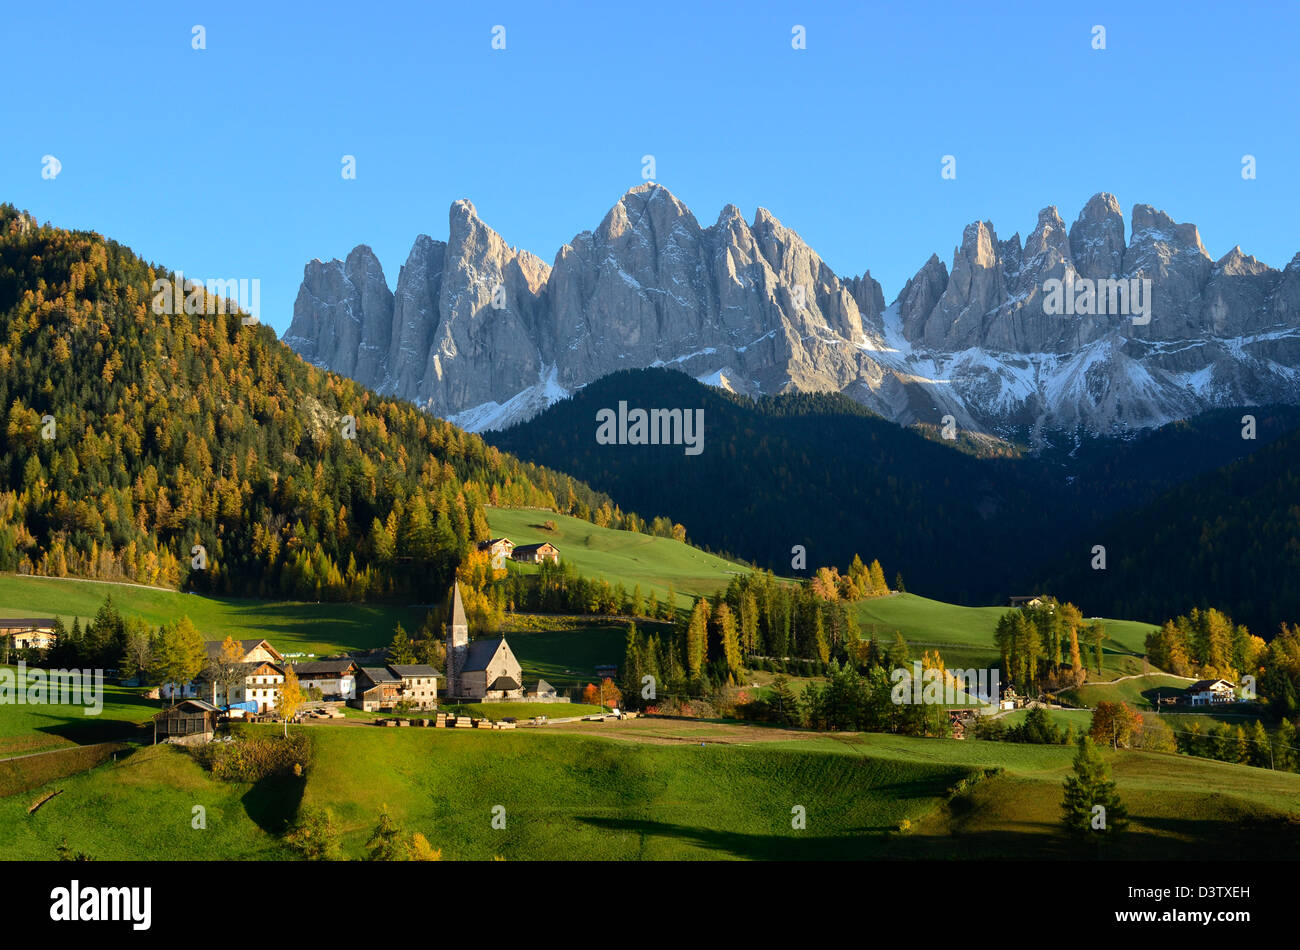 St. Magdalena or Santa Maddalena with its characteristic church in front of the Geisler or Odle Dolomites mountain peaks. Stock Photo